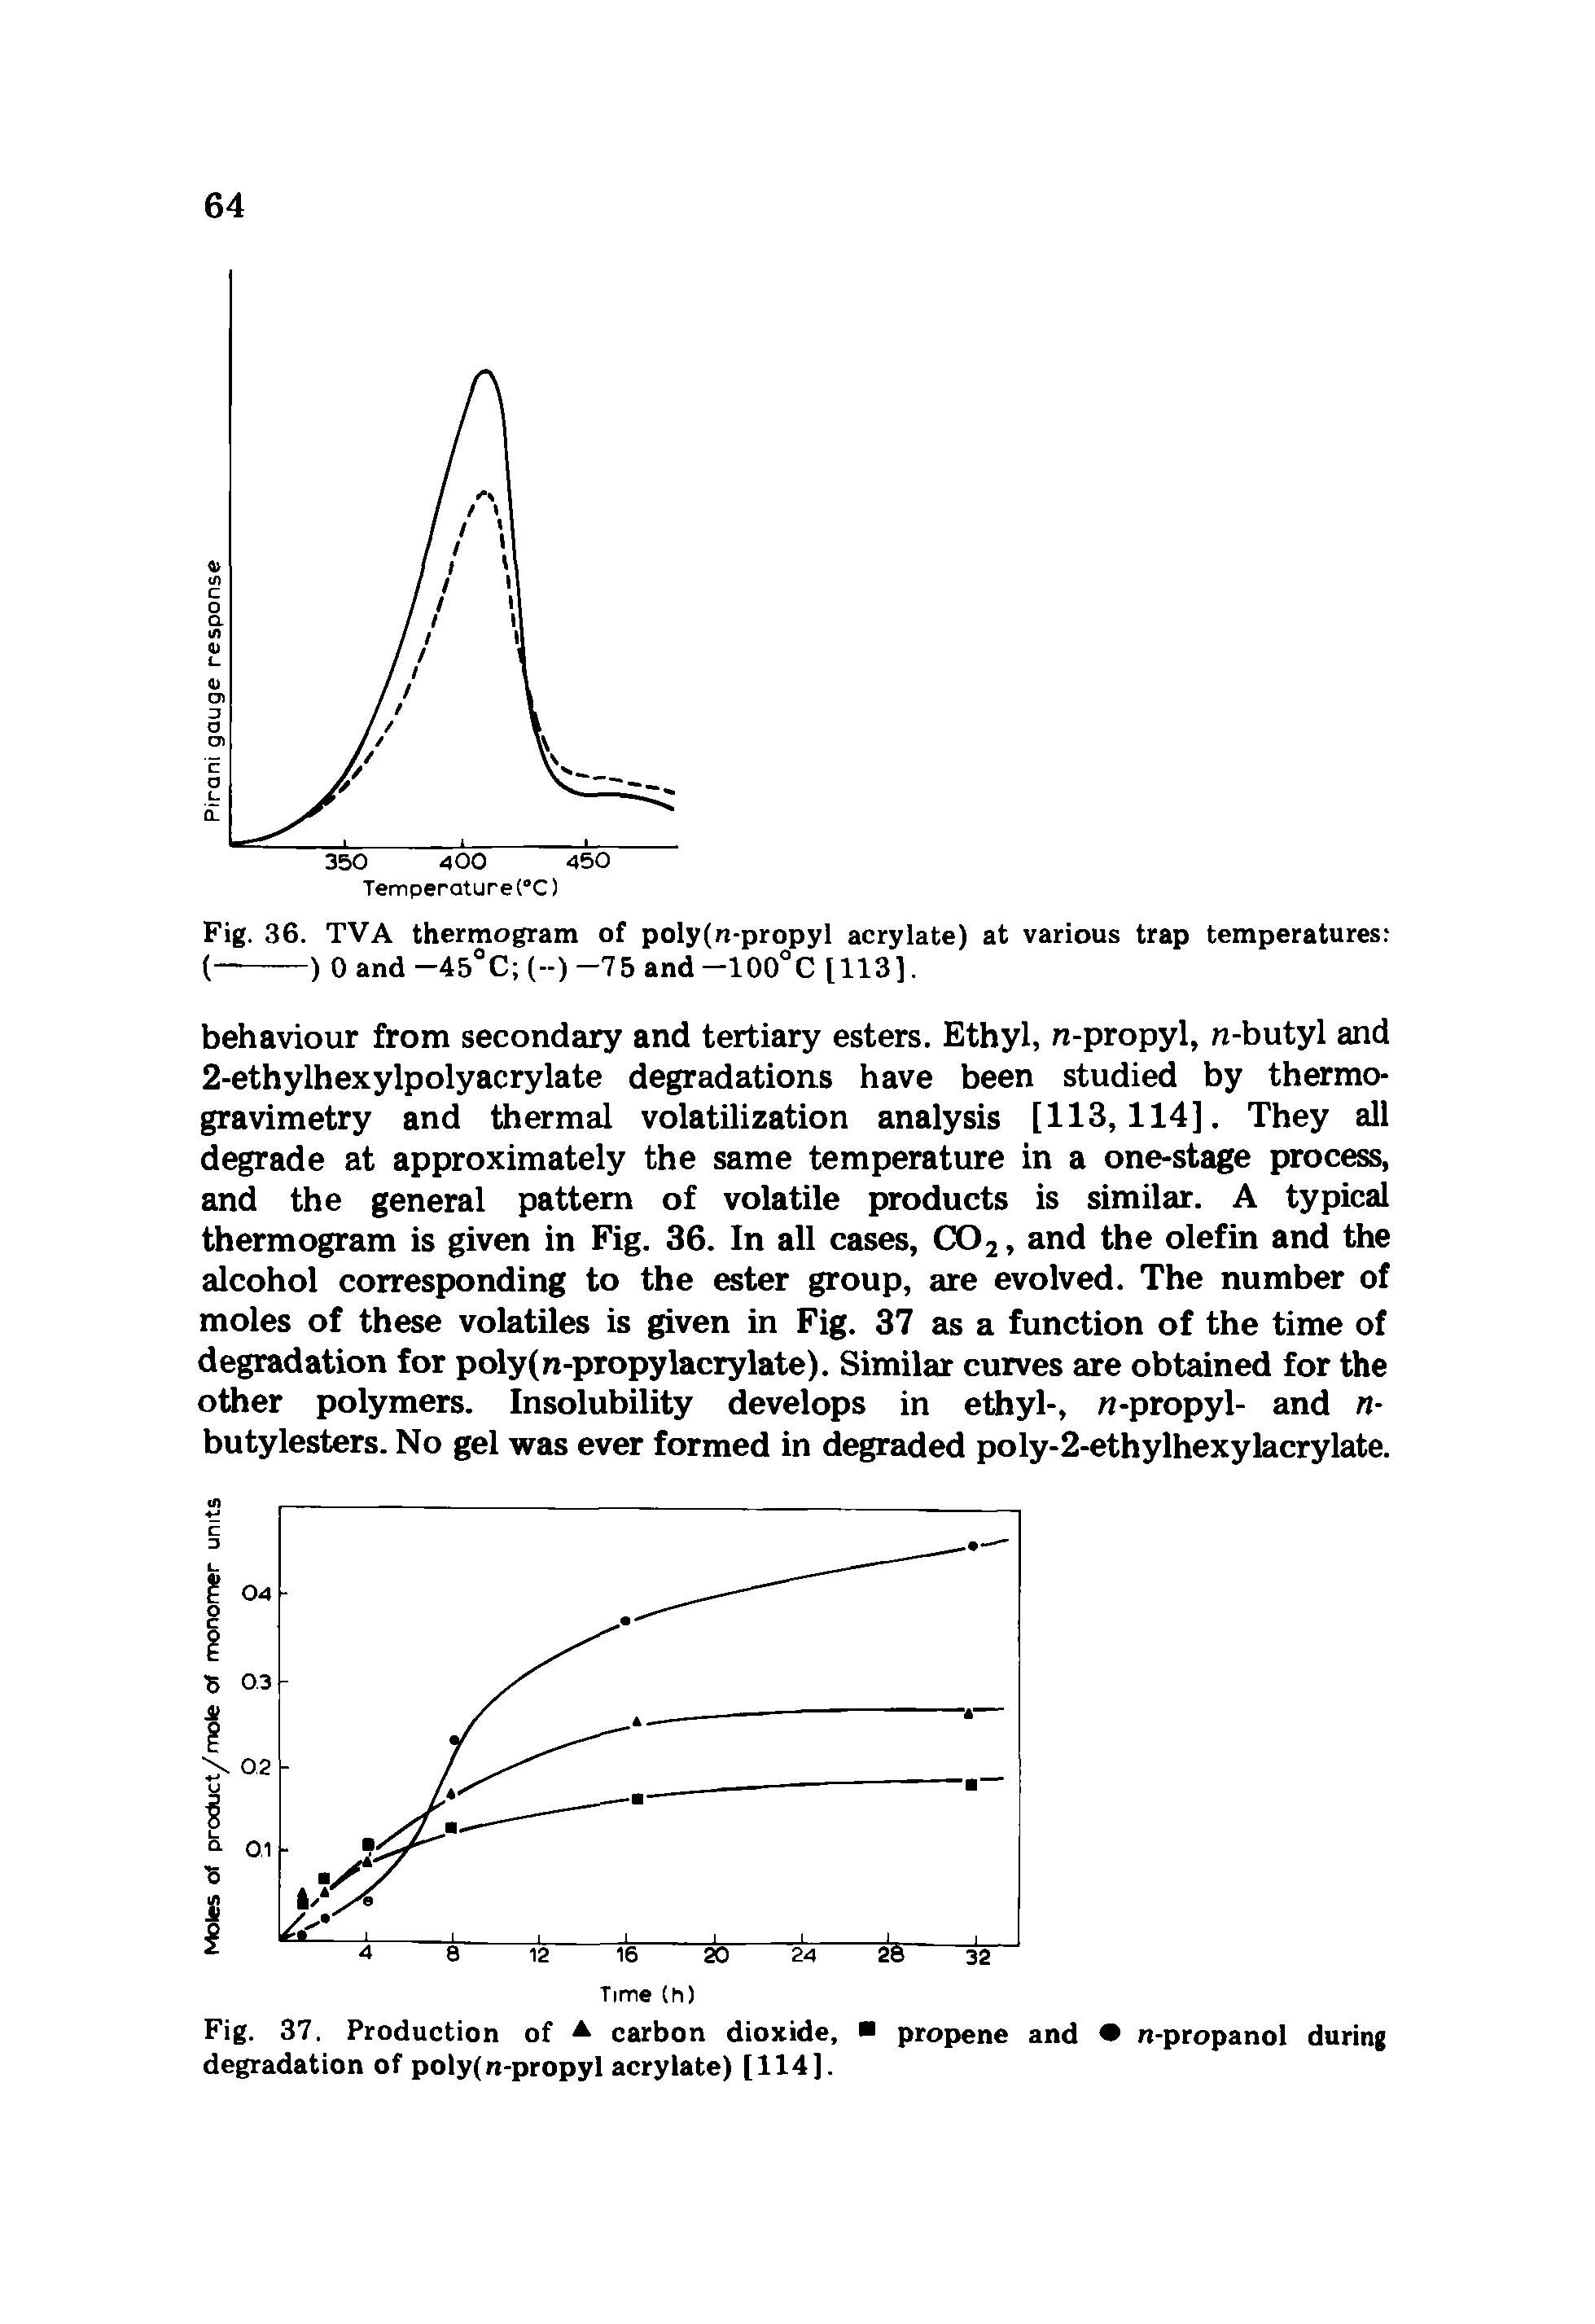 Fig. 37. Production of A carbon dioxide, propene and n-propanol during degradation of poly(n-propyl acrylate) [114].